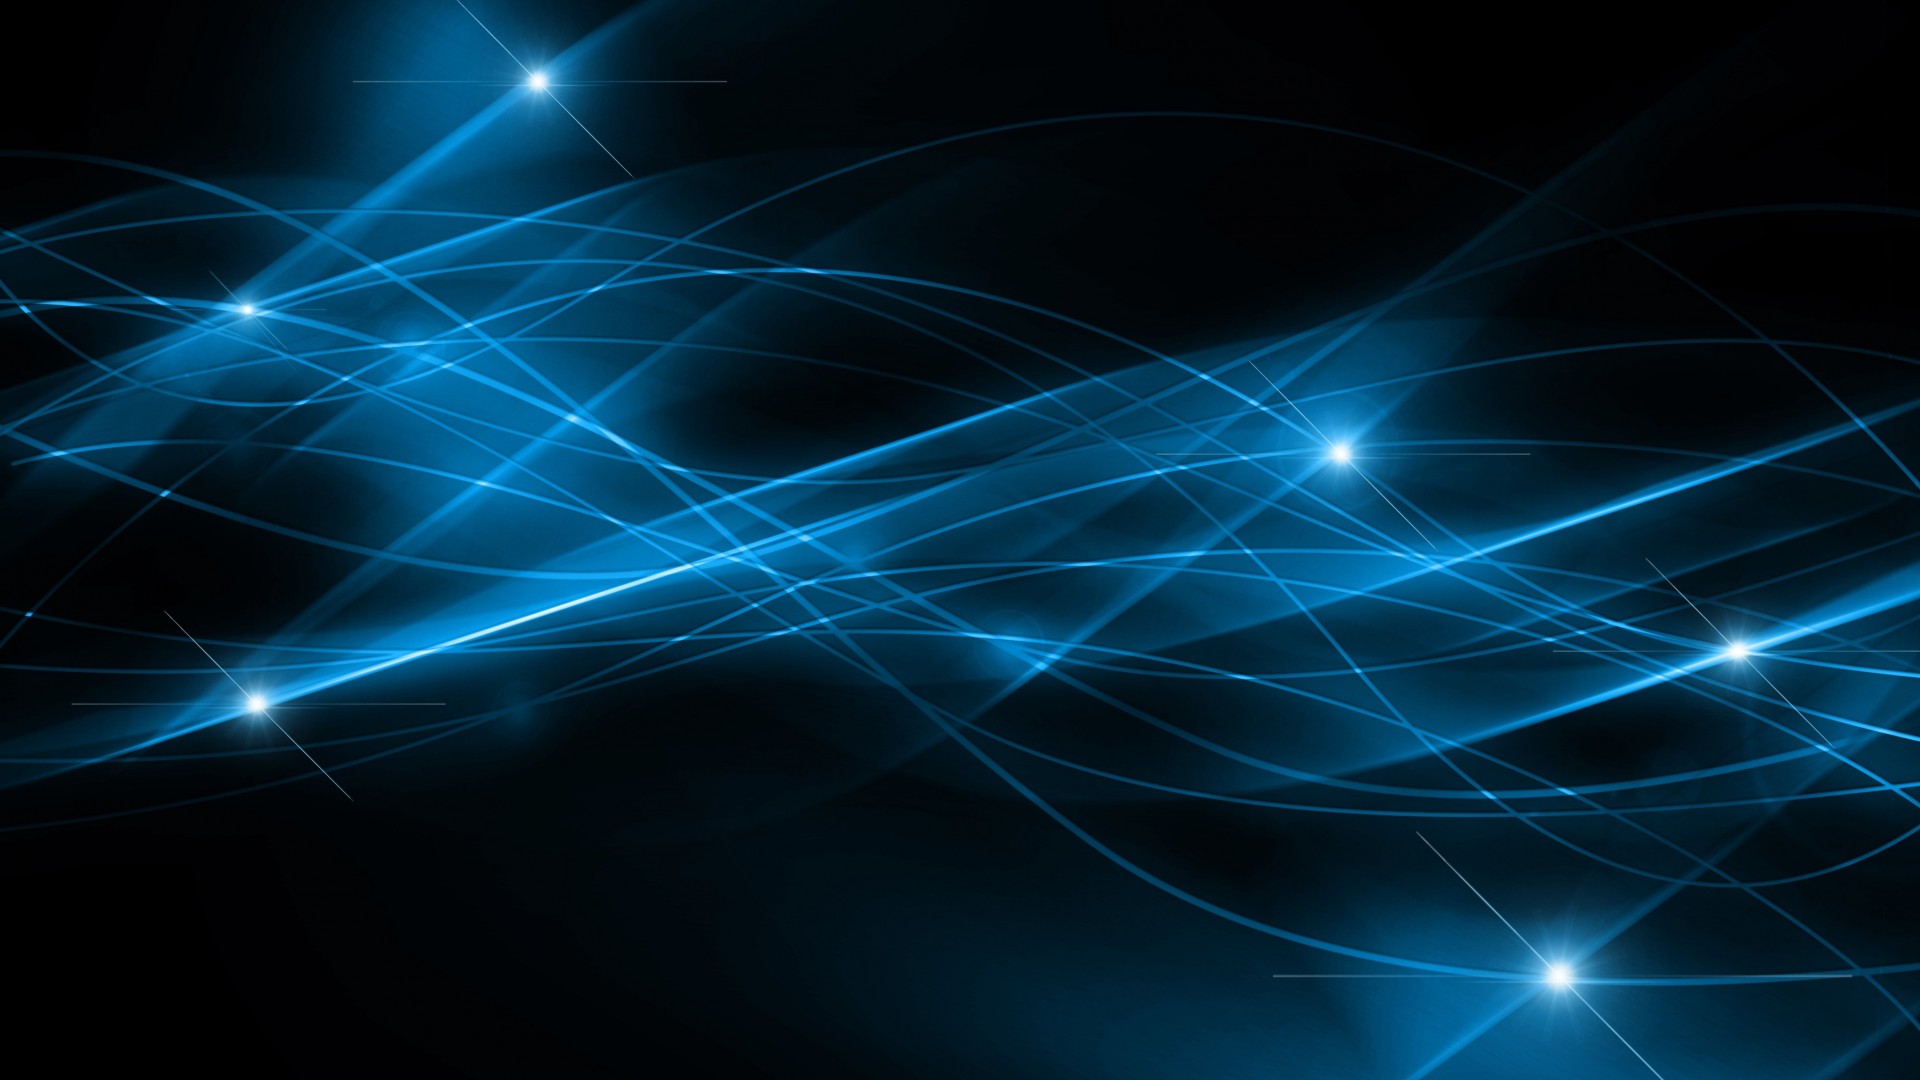  1080 Black And Blue Abstract Backgrounds Hd 1080P 12 HD Wallpapers 1920x1080